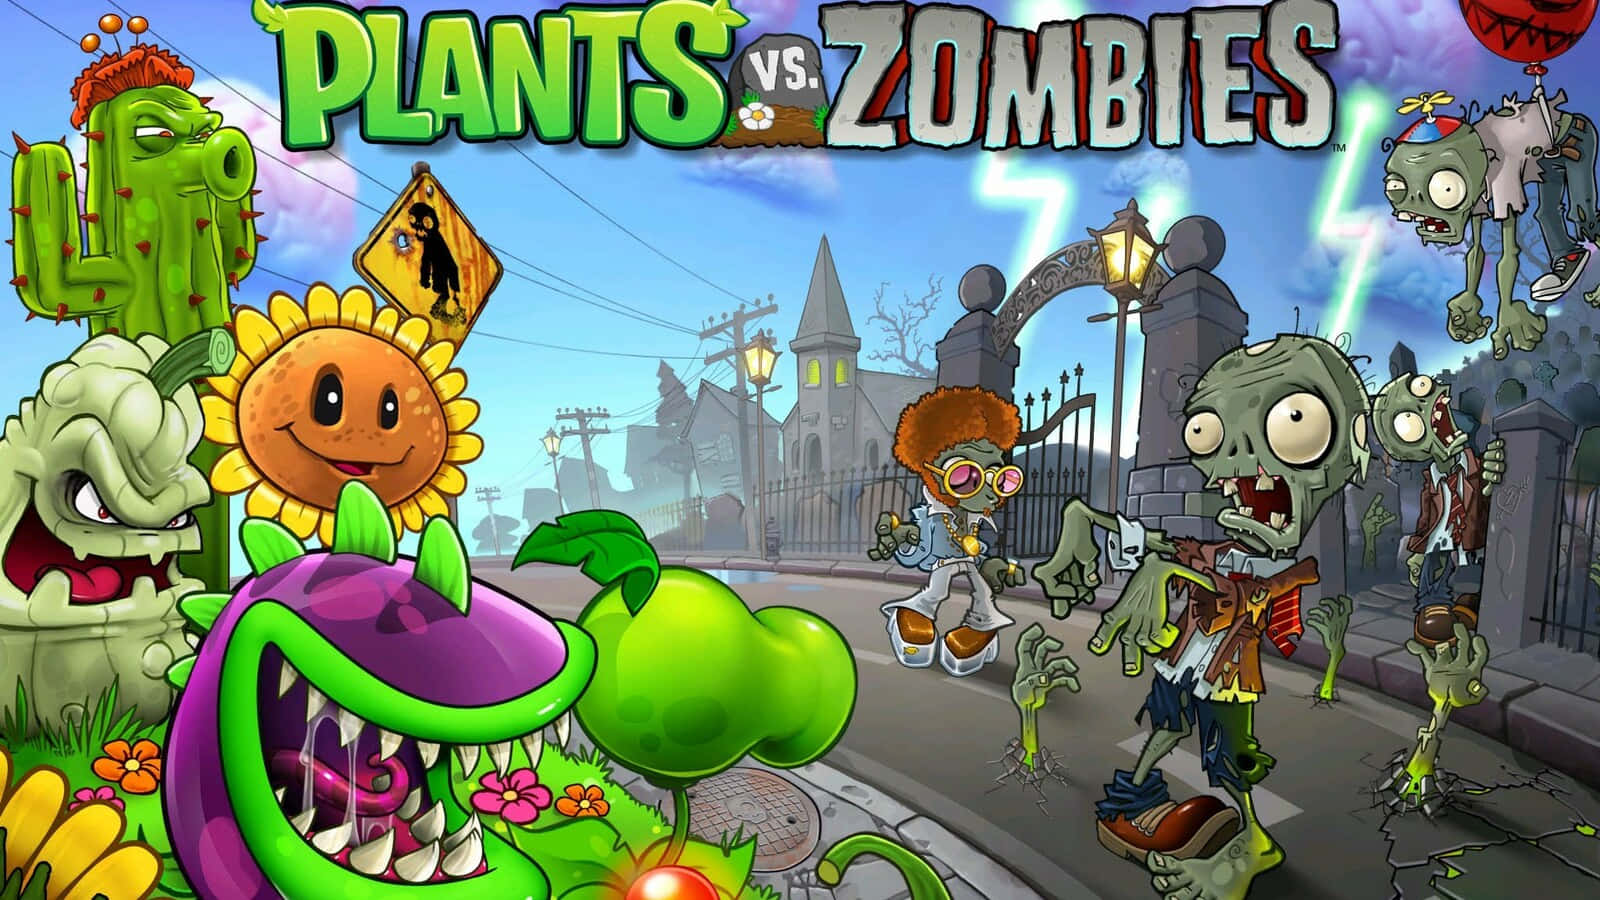 Get Ready For The Thrilling Adventure Of Plants Vs Zombies!